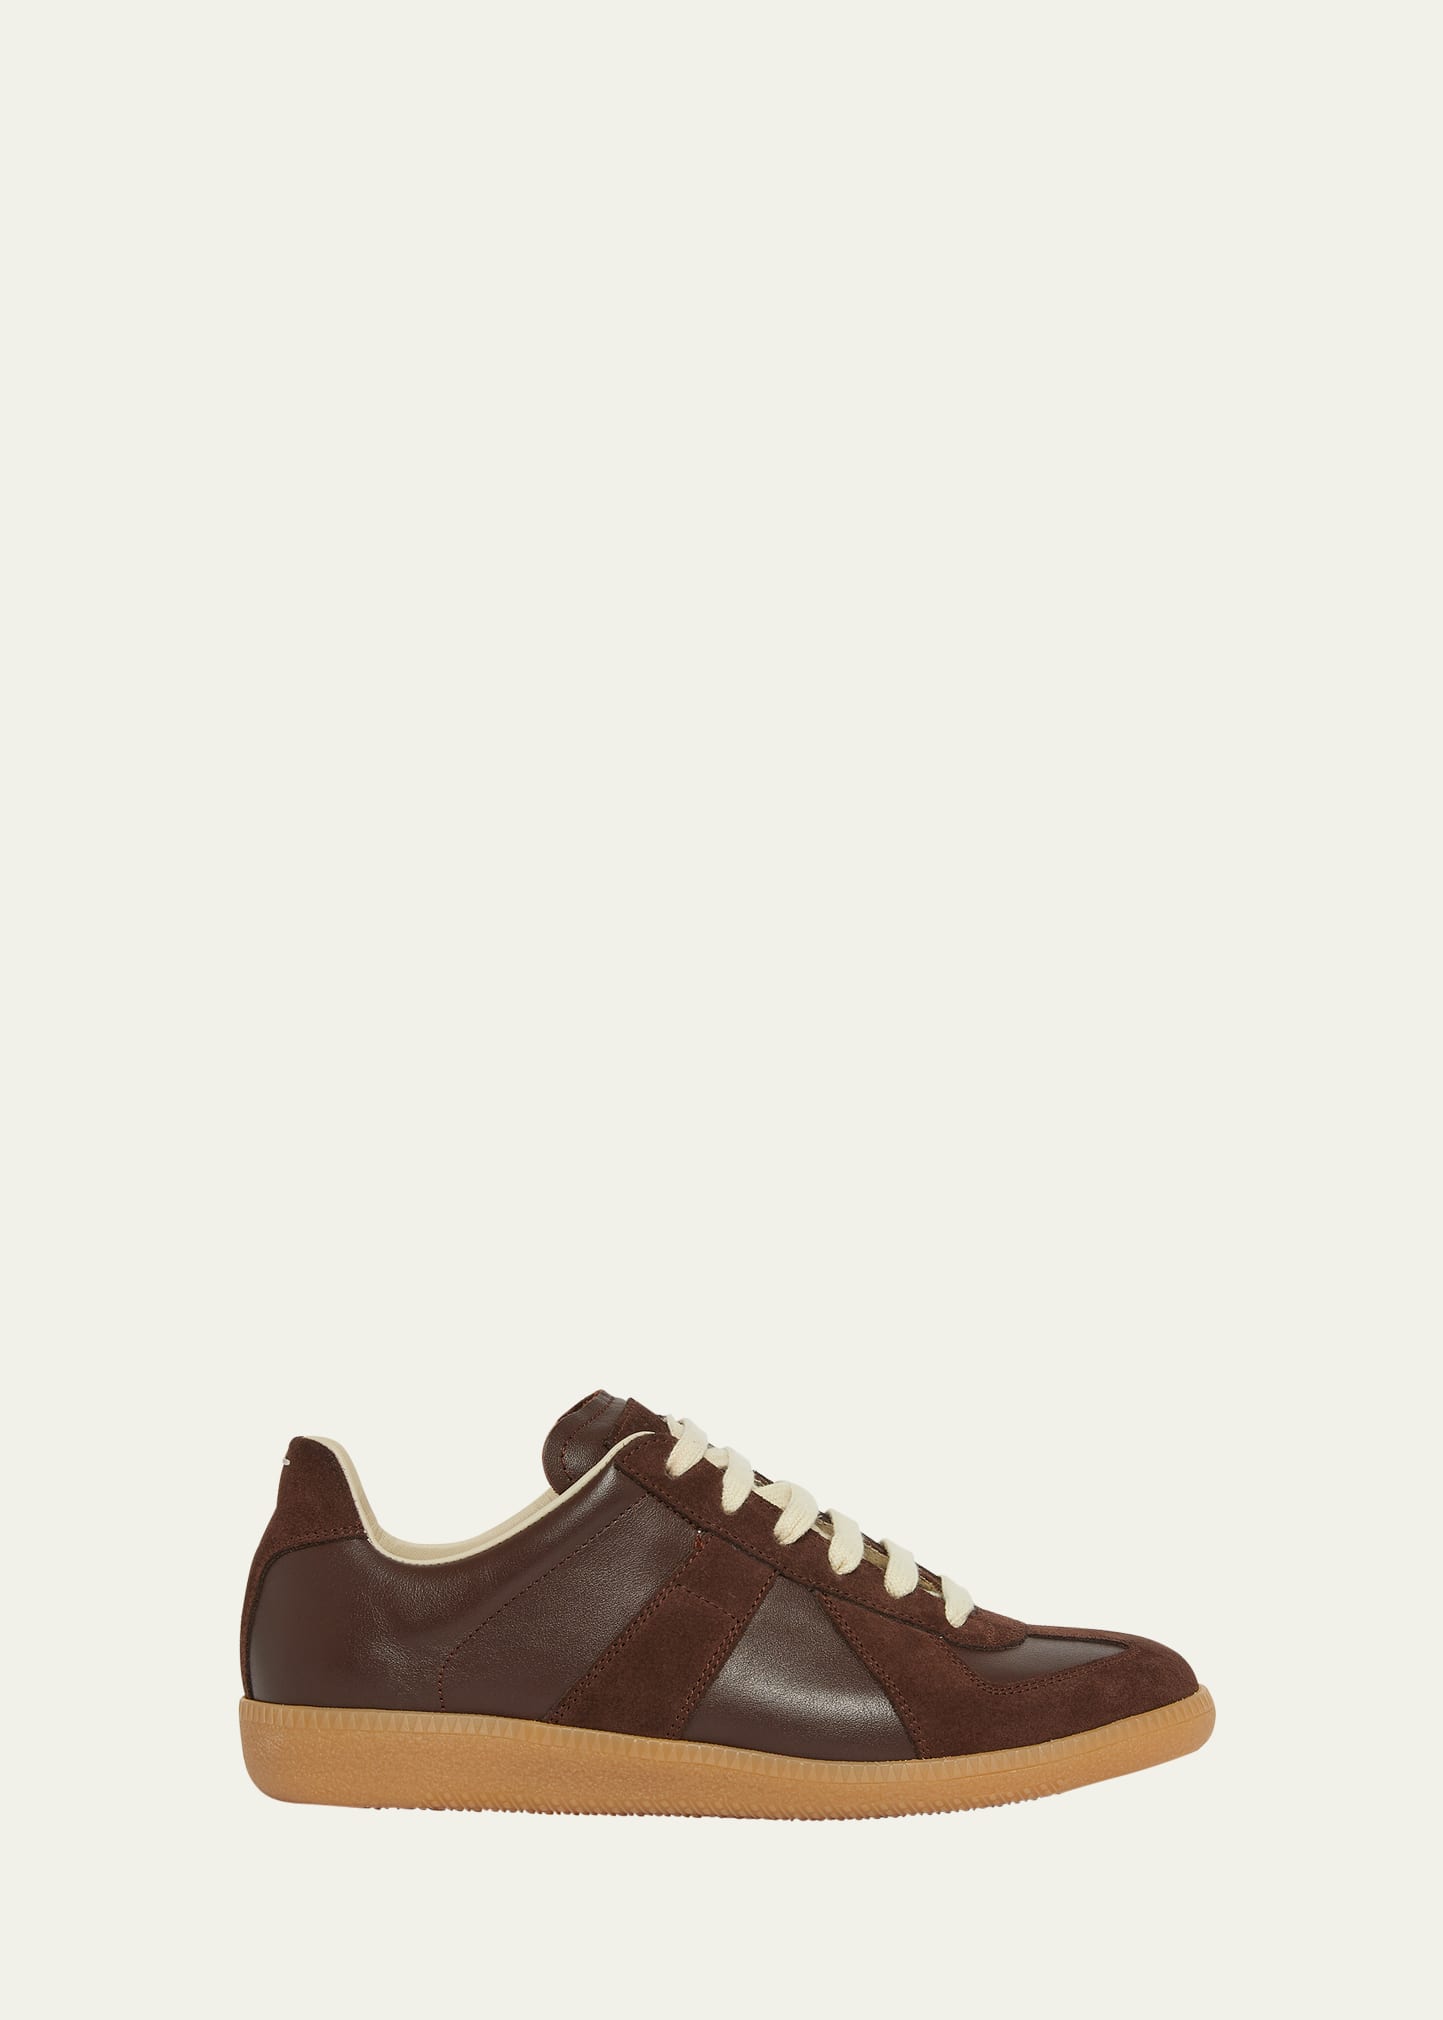 Maison Margiela Replica Suede & Leather Sneakers In Brown